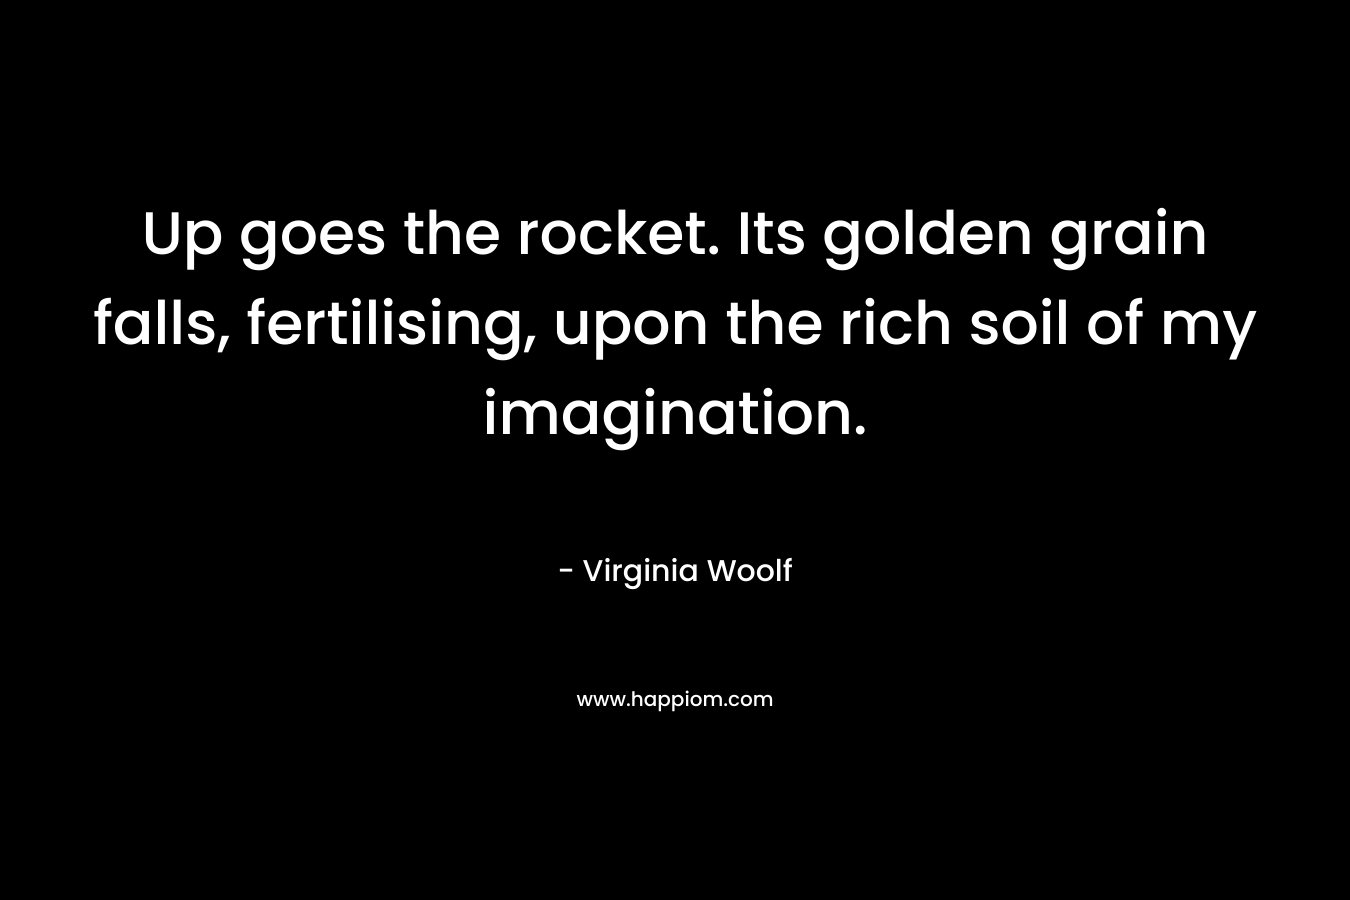 Up goes the rocket. Its golden grain falls, fertilising, upon the rich soil of my imagination. – Virginia Woolf